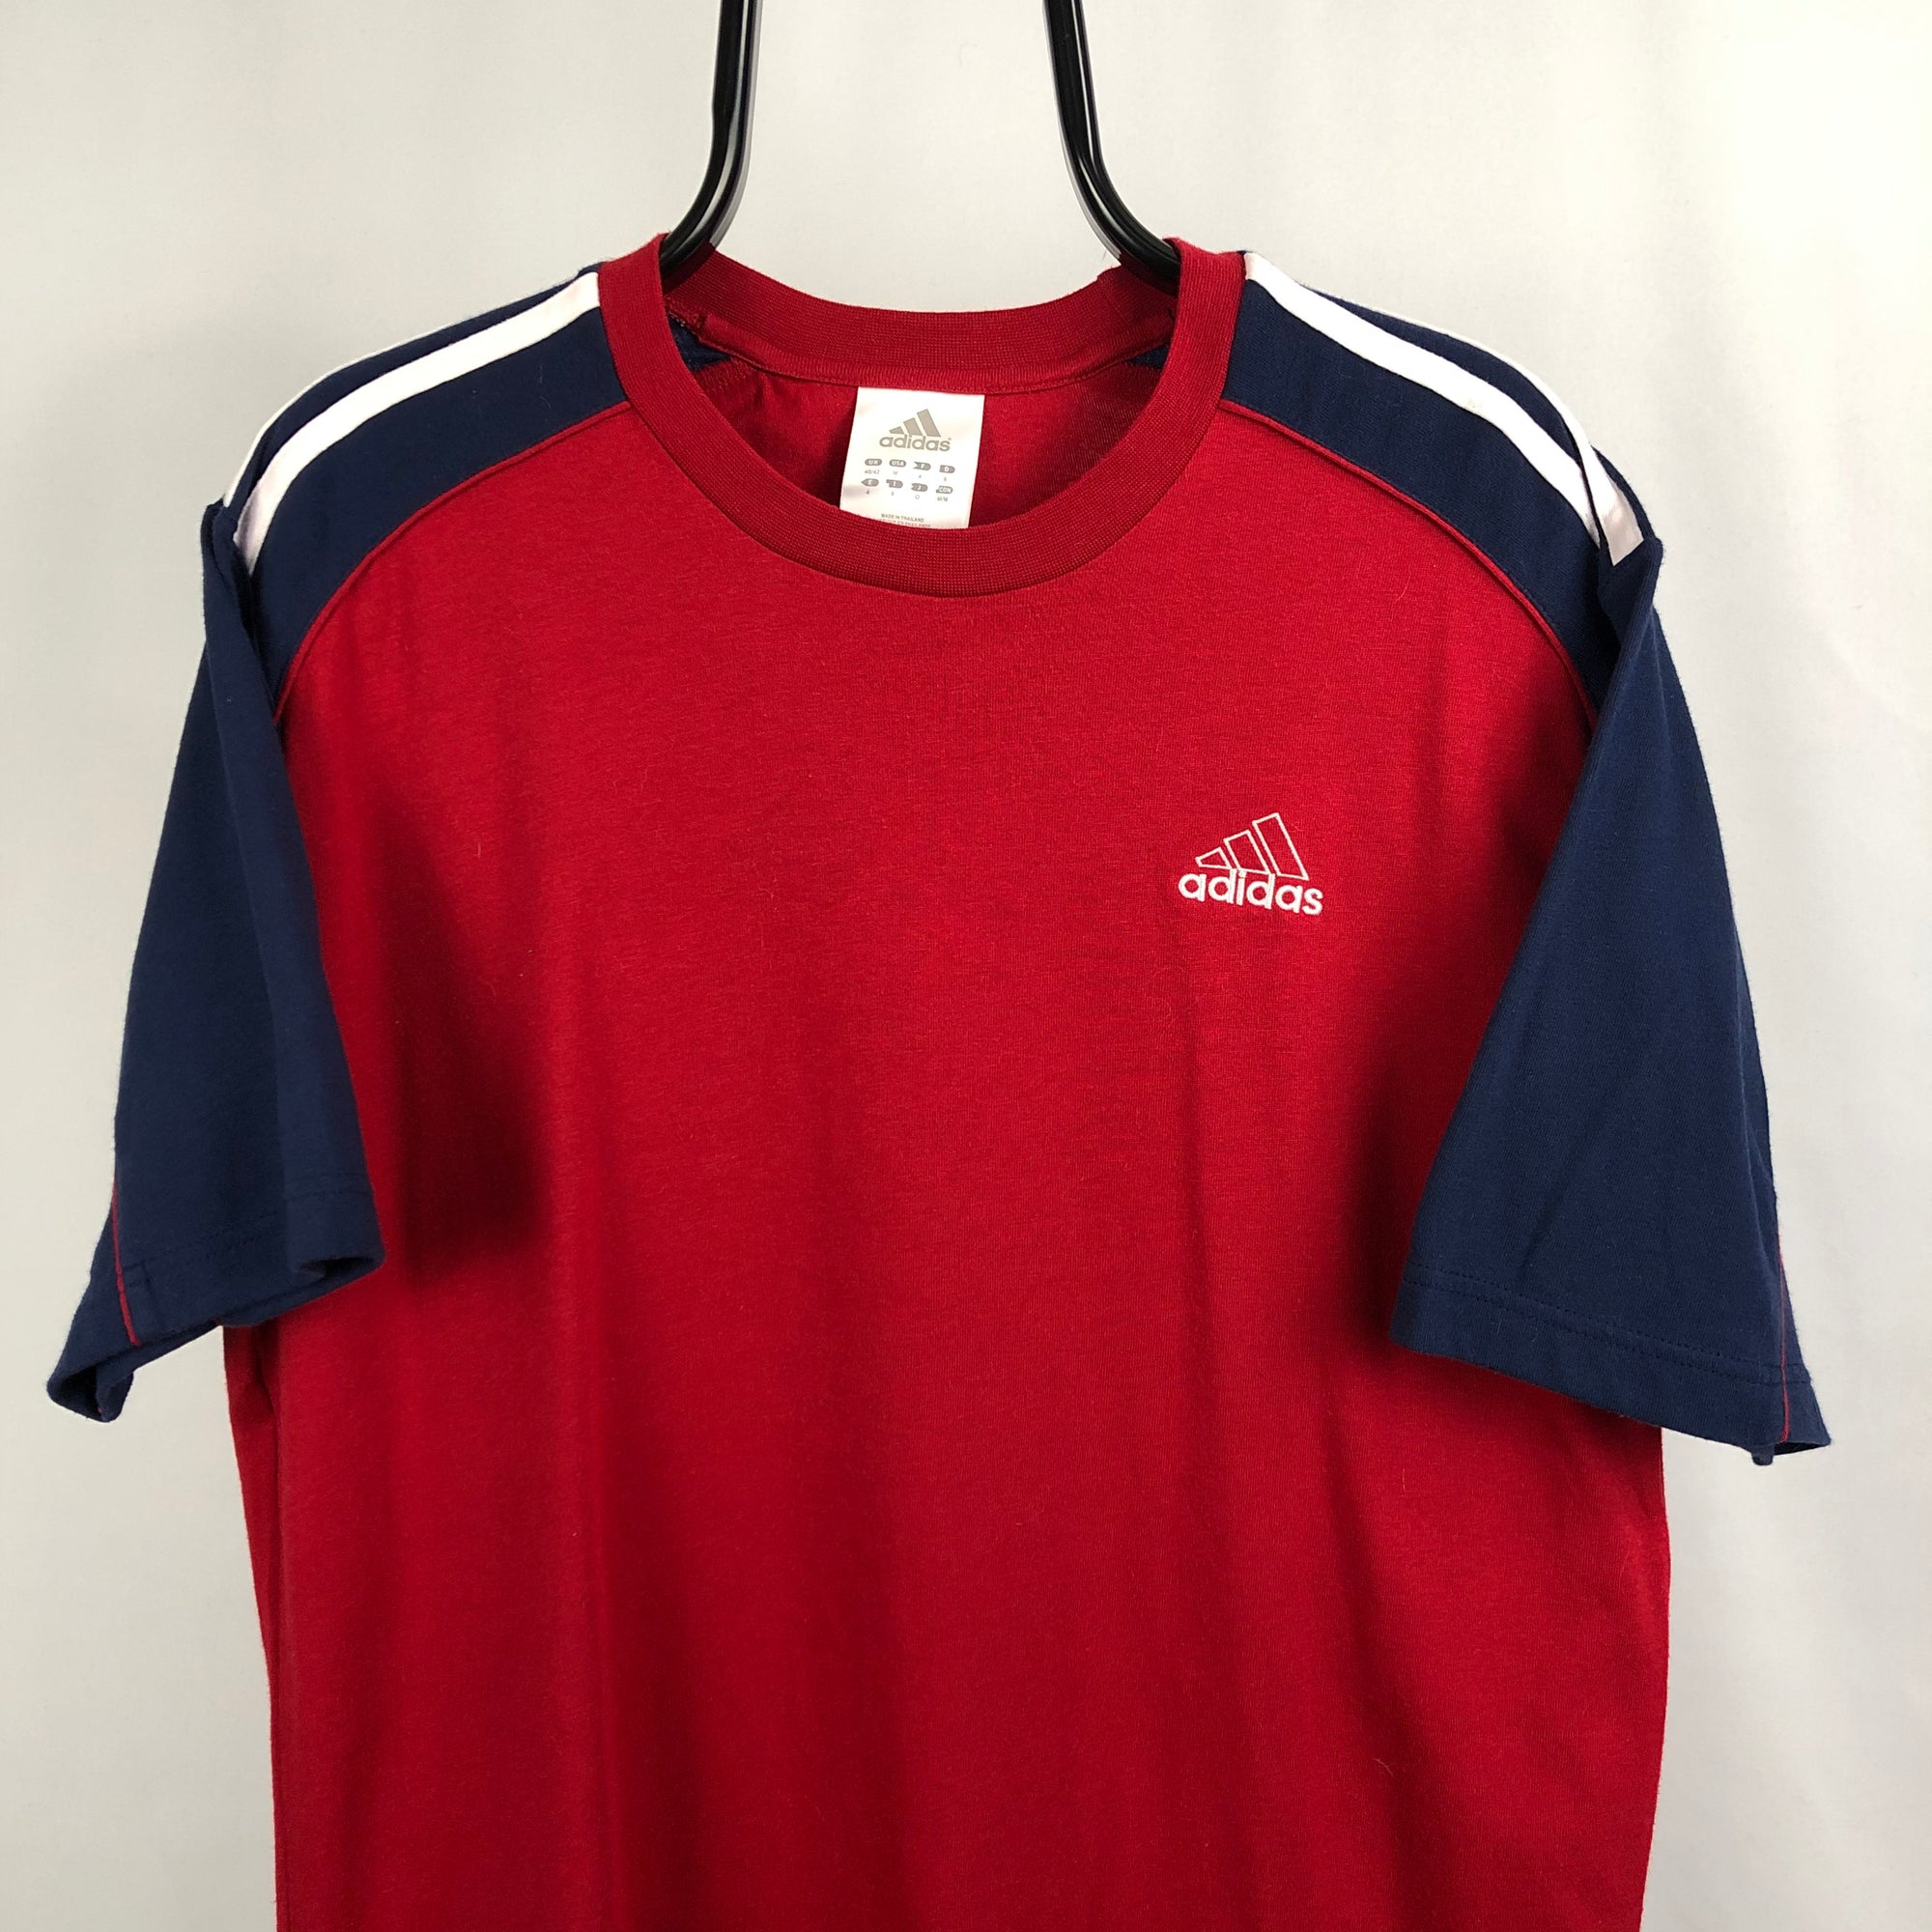 Vintage Adidas Embroidered Small Logo Tee in Red/Navy - Men's Large/Women's XL